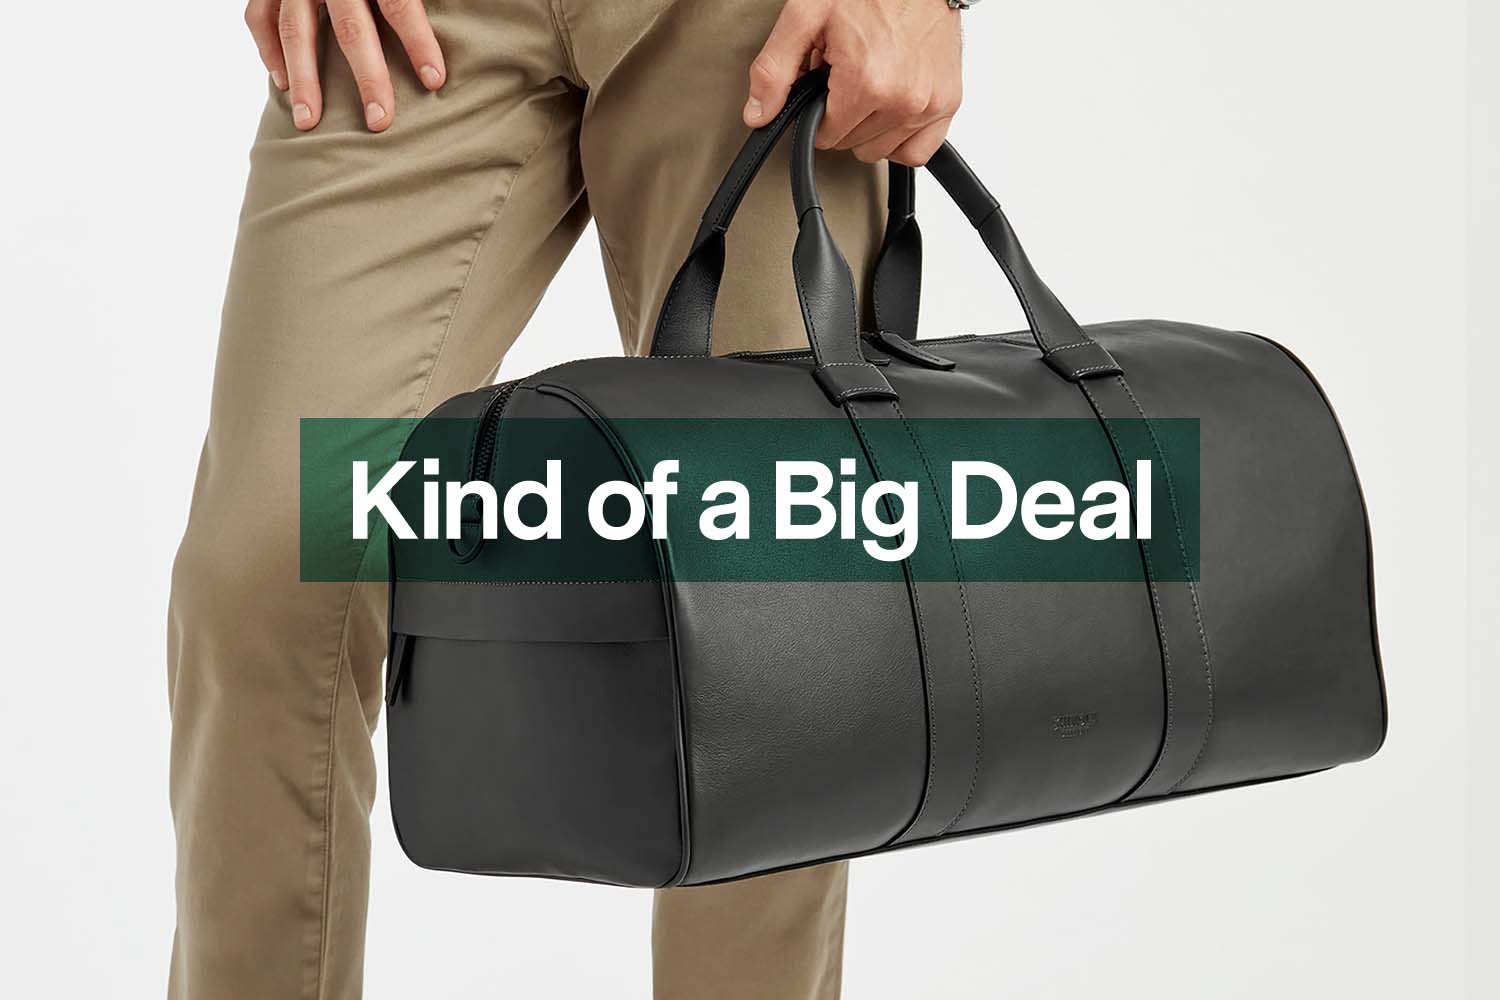 Shinola’s Handsome Leather Bags Are Currently Up to 63% Off - InsideHook